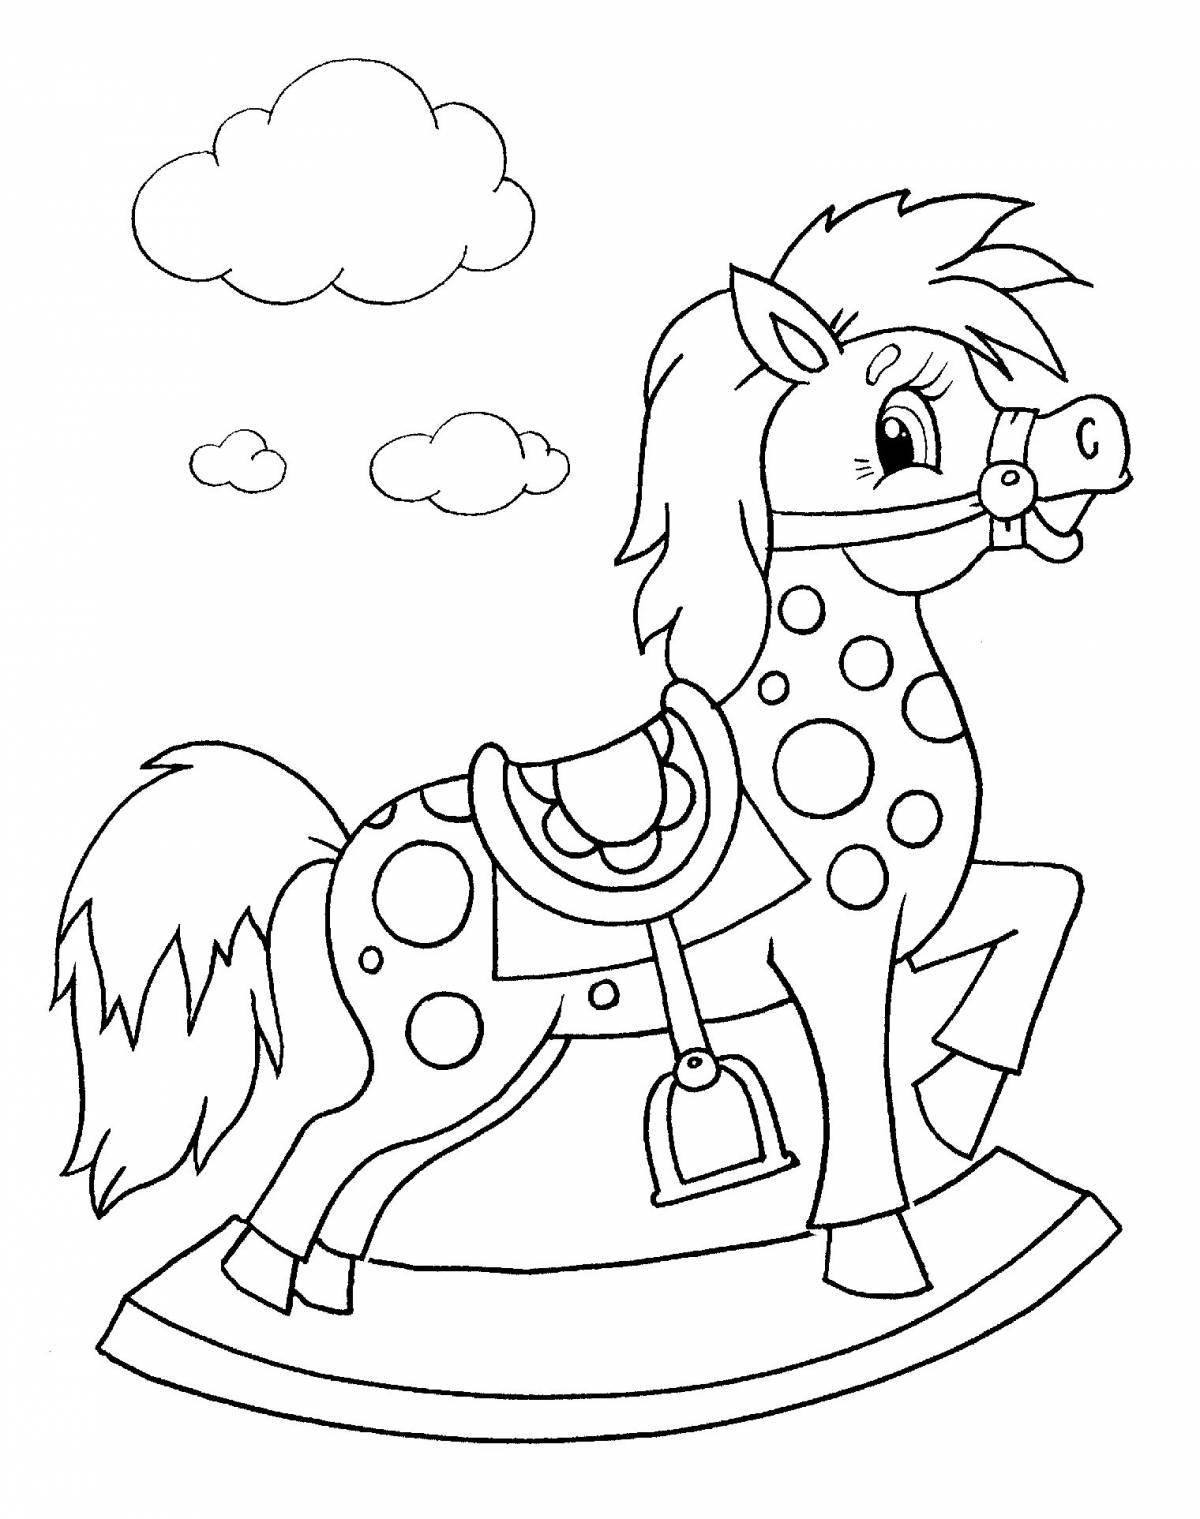 Coloring book for kids 5-6 years old